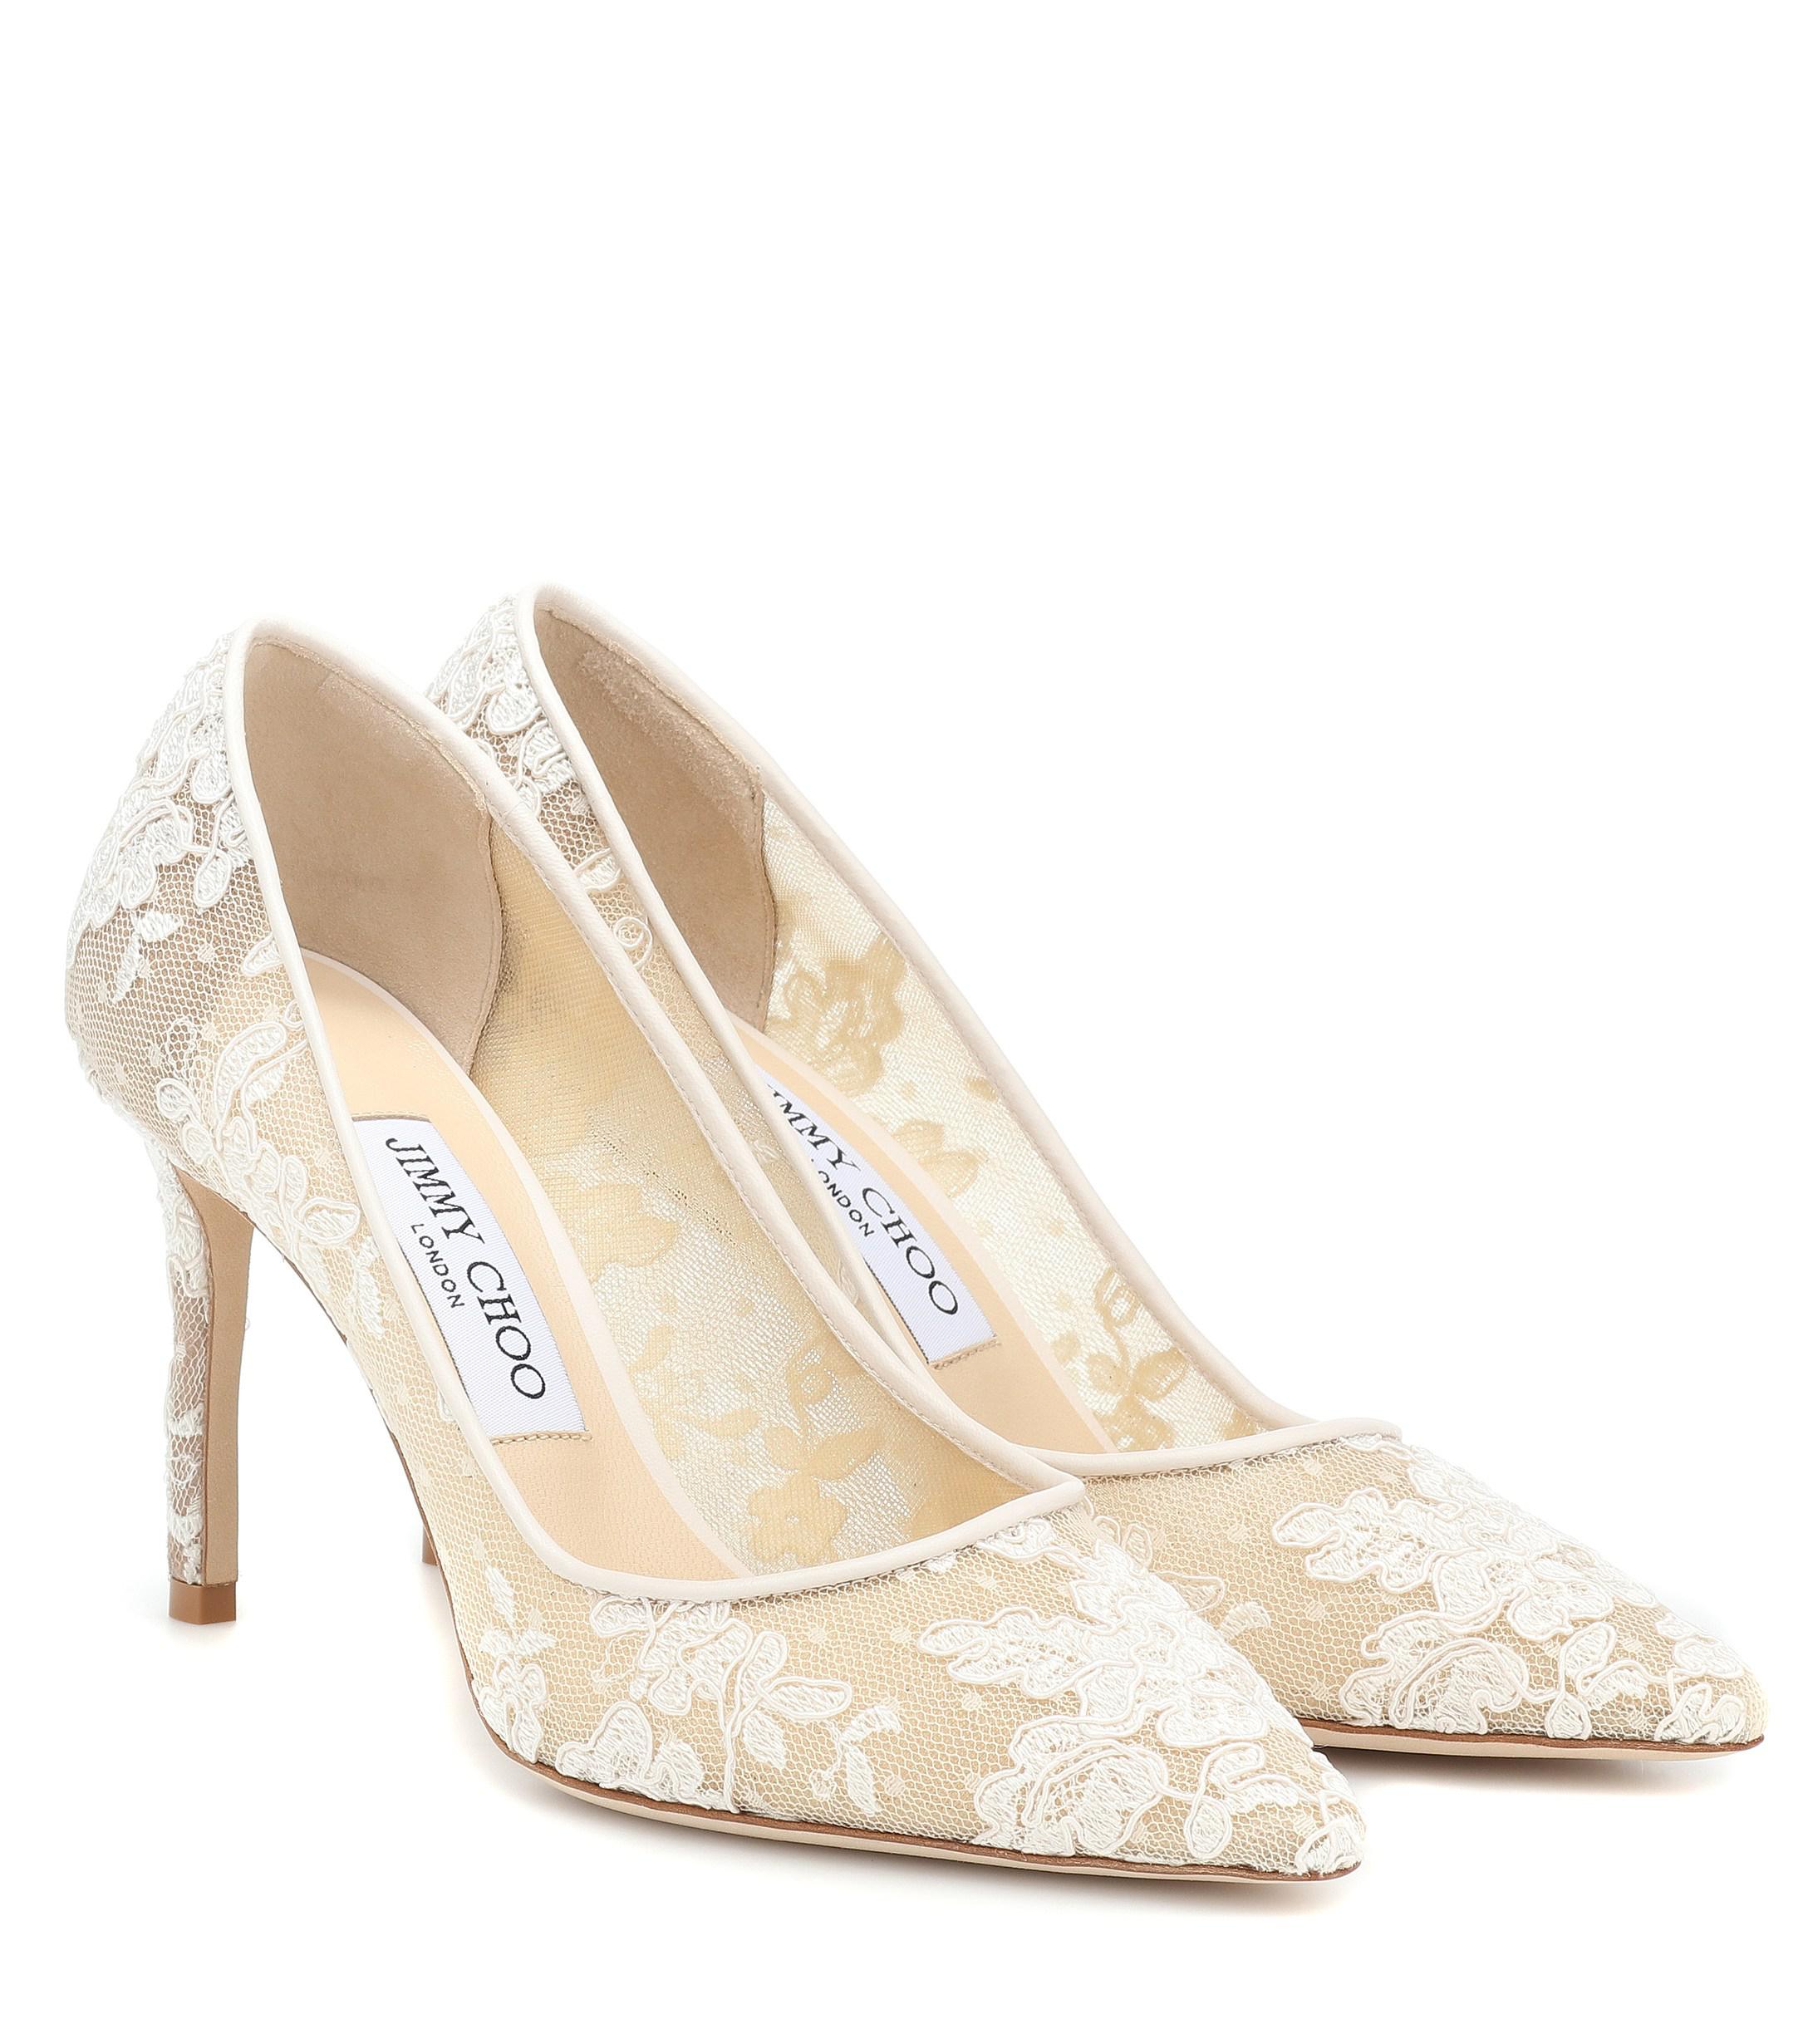 Jimmy Choo Romy 85 Lace Pumps in Ivory (White) - Lyst